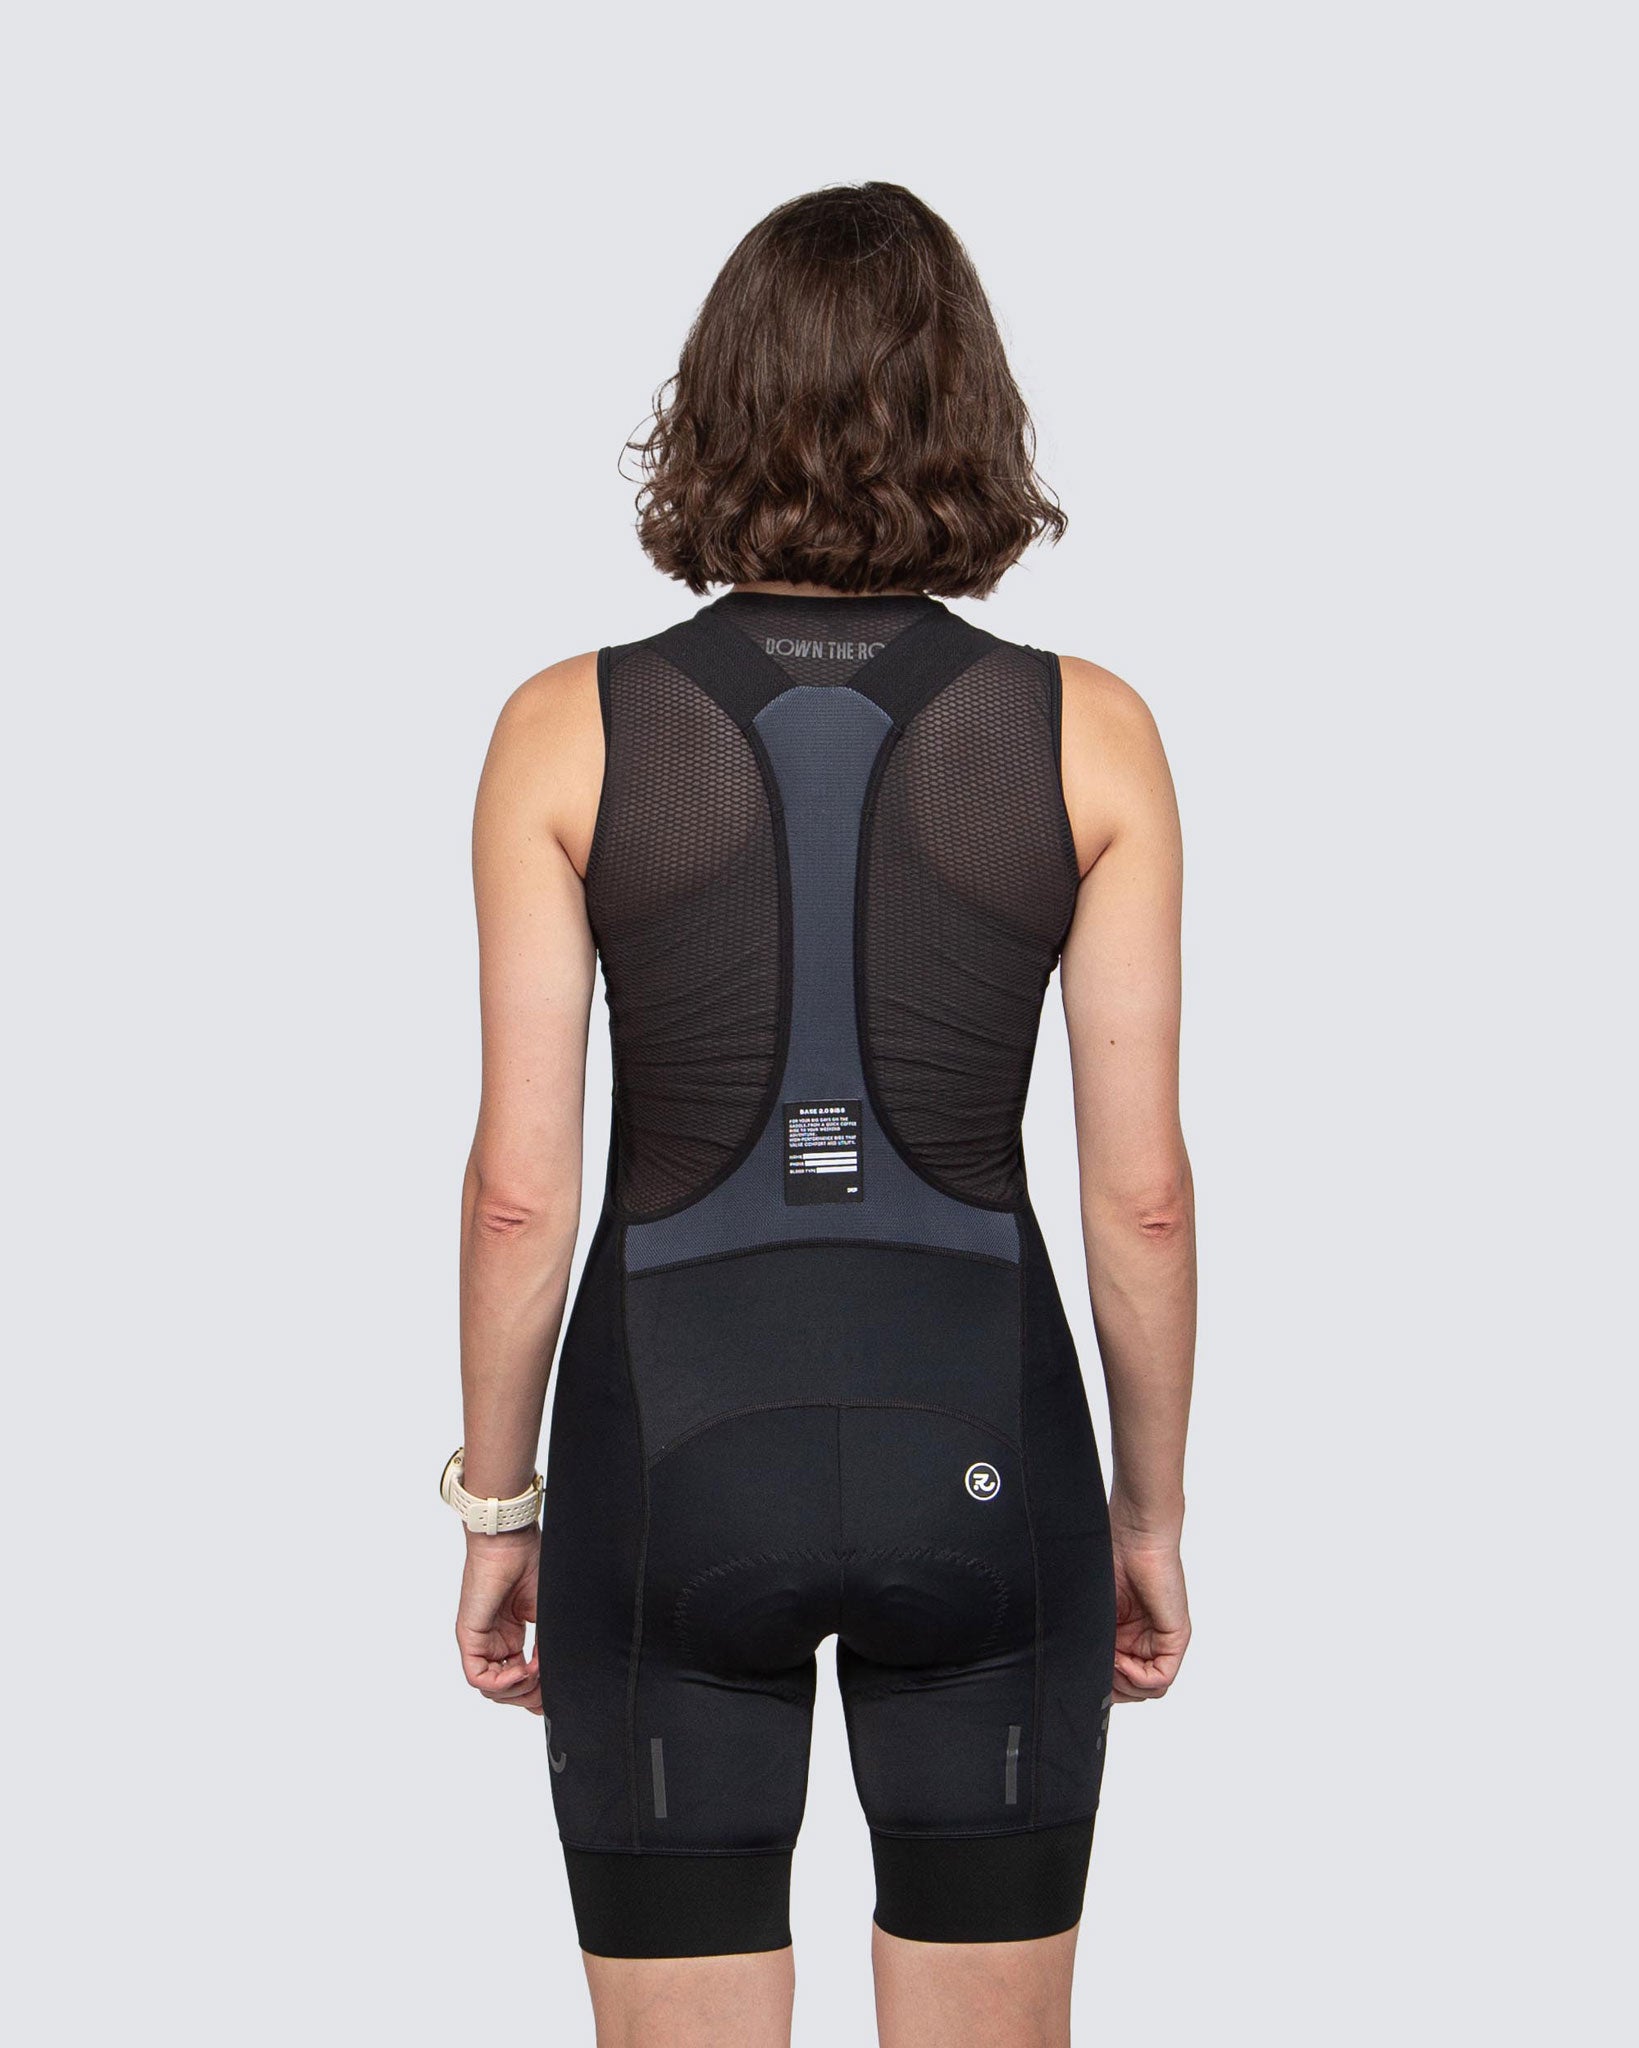 back view fo black cycling bibs and black base layer